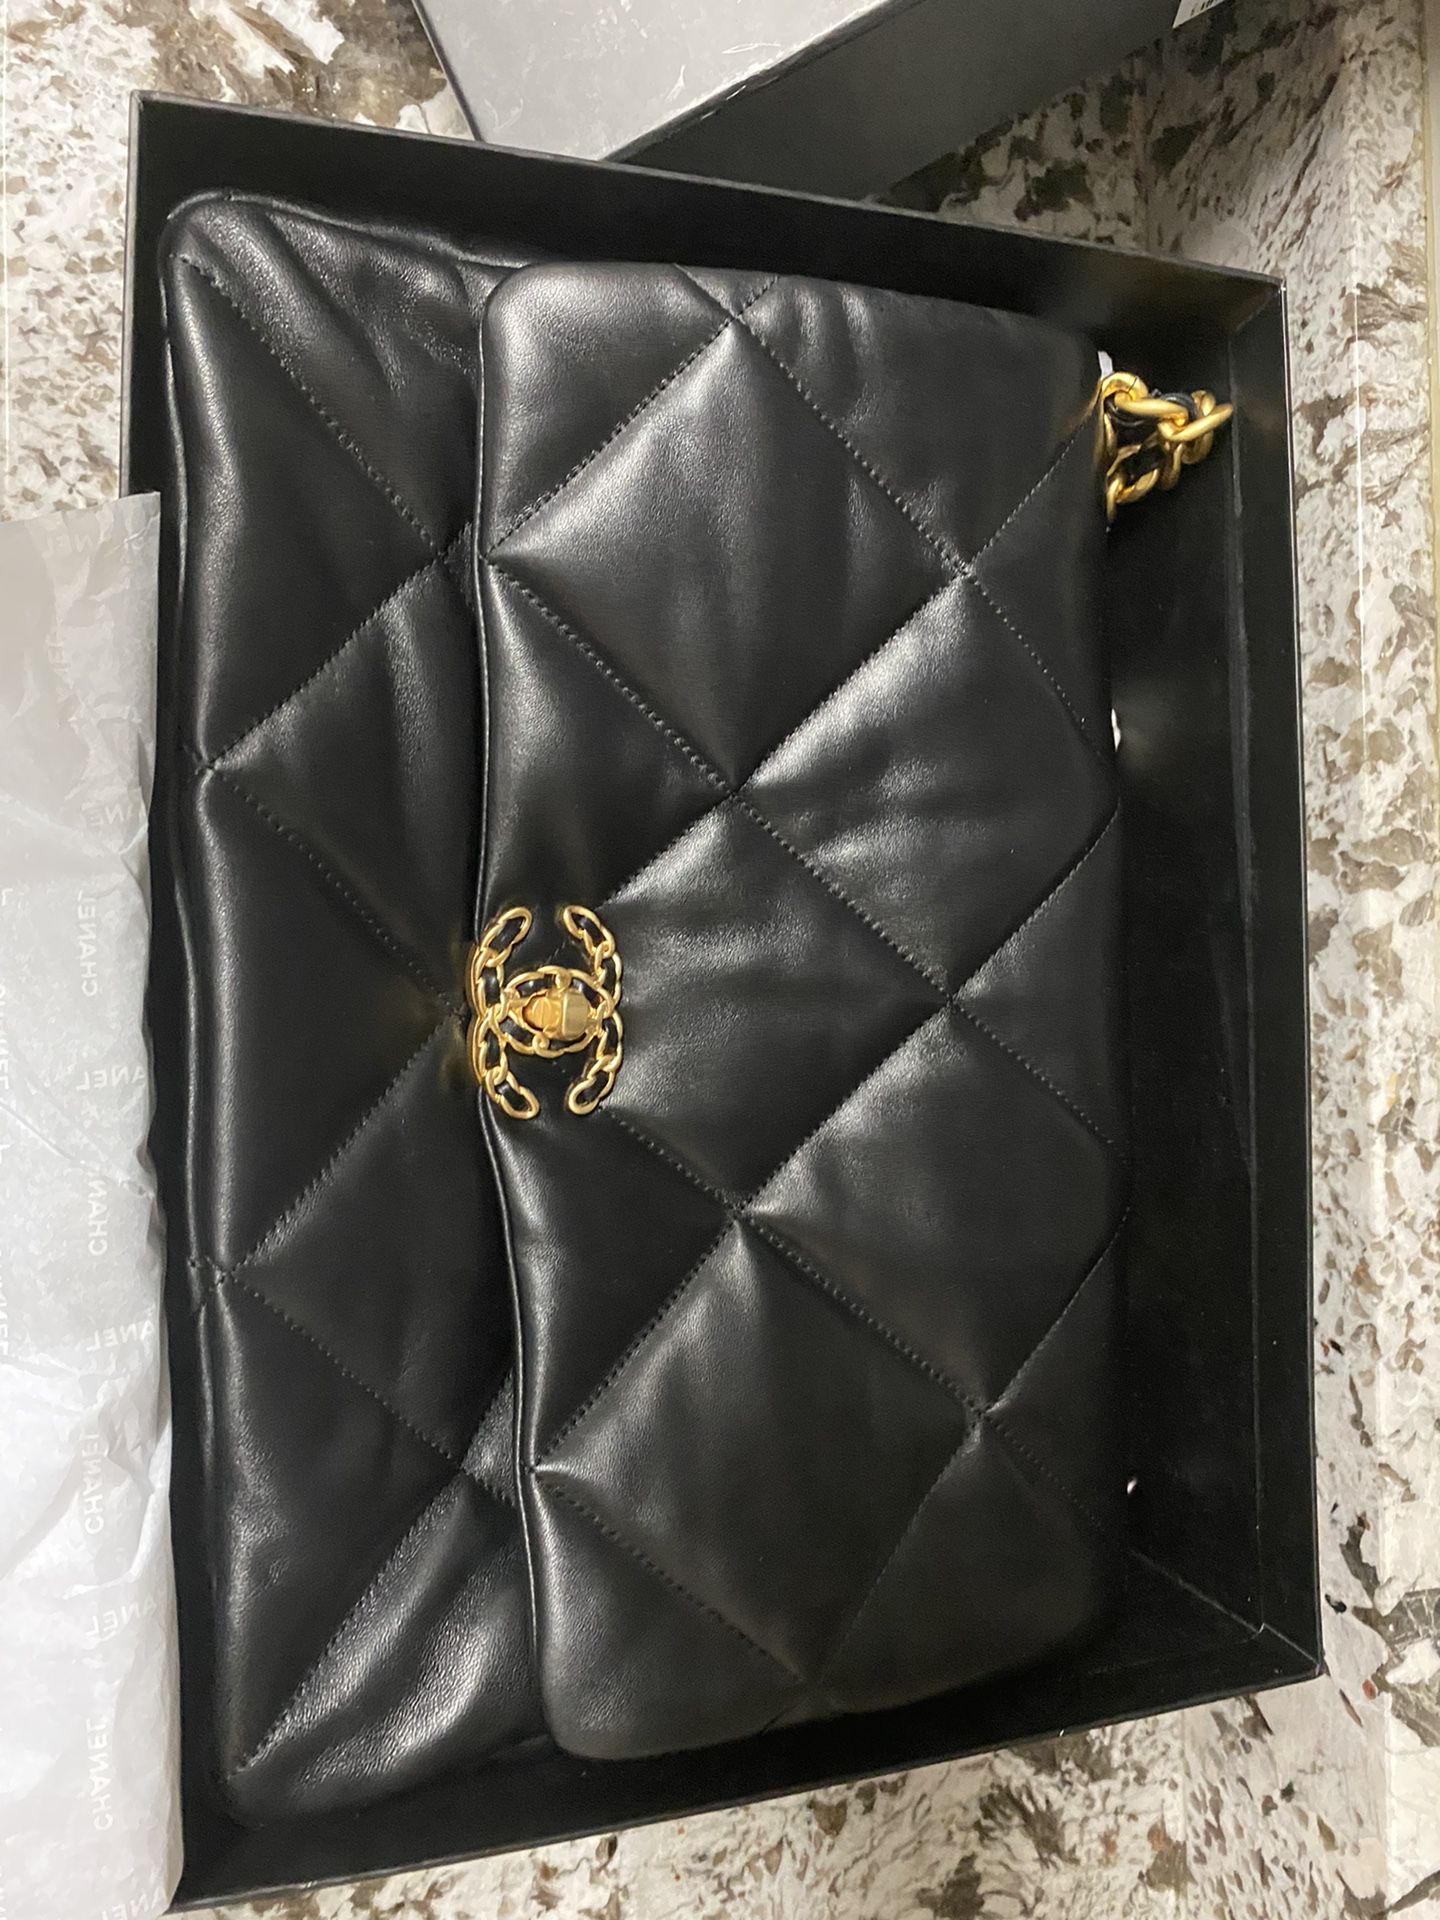 Authentic Chanel Maxi Handbag New Without Tag